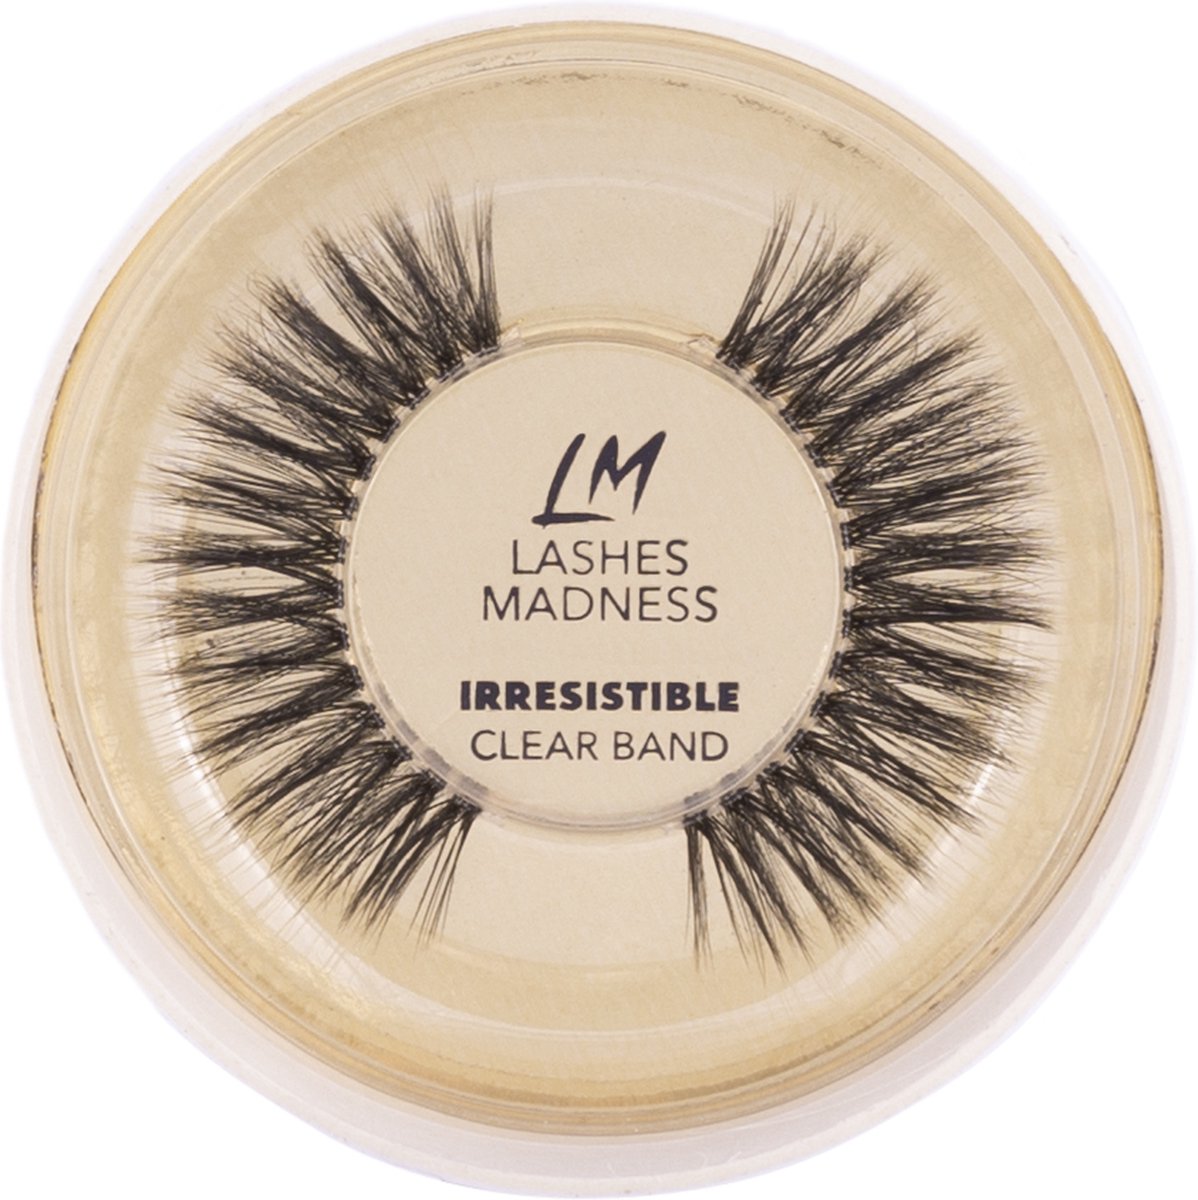 Lashes Madness - IRRESISTIBLE - Clear Band - Vegan Mink Lashes - Wimpers - Valse Wimpers - Eyelashes - Luxe Wimpers